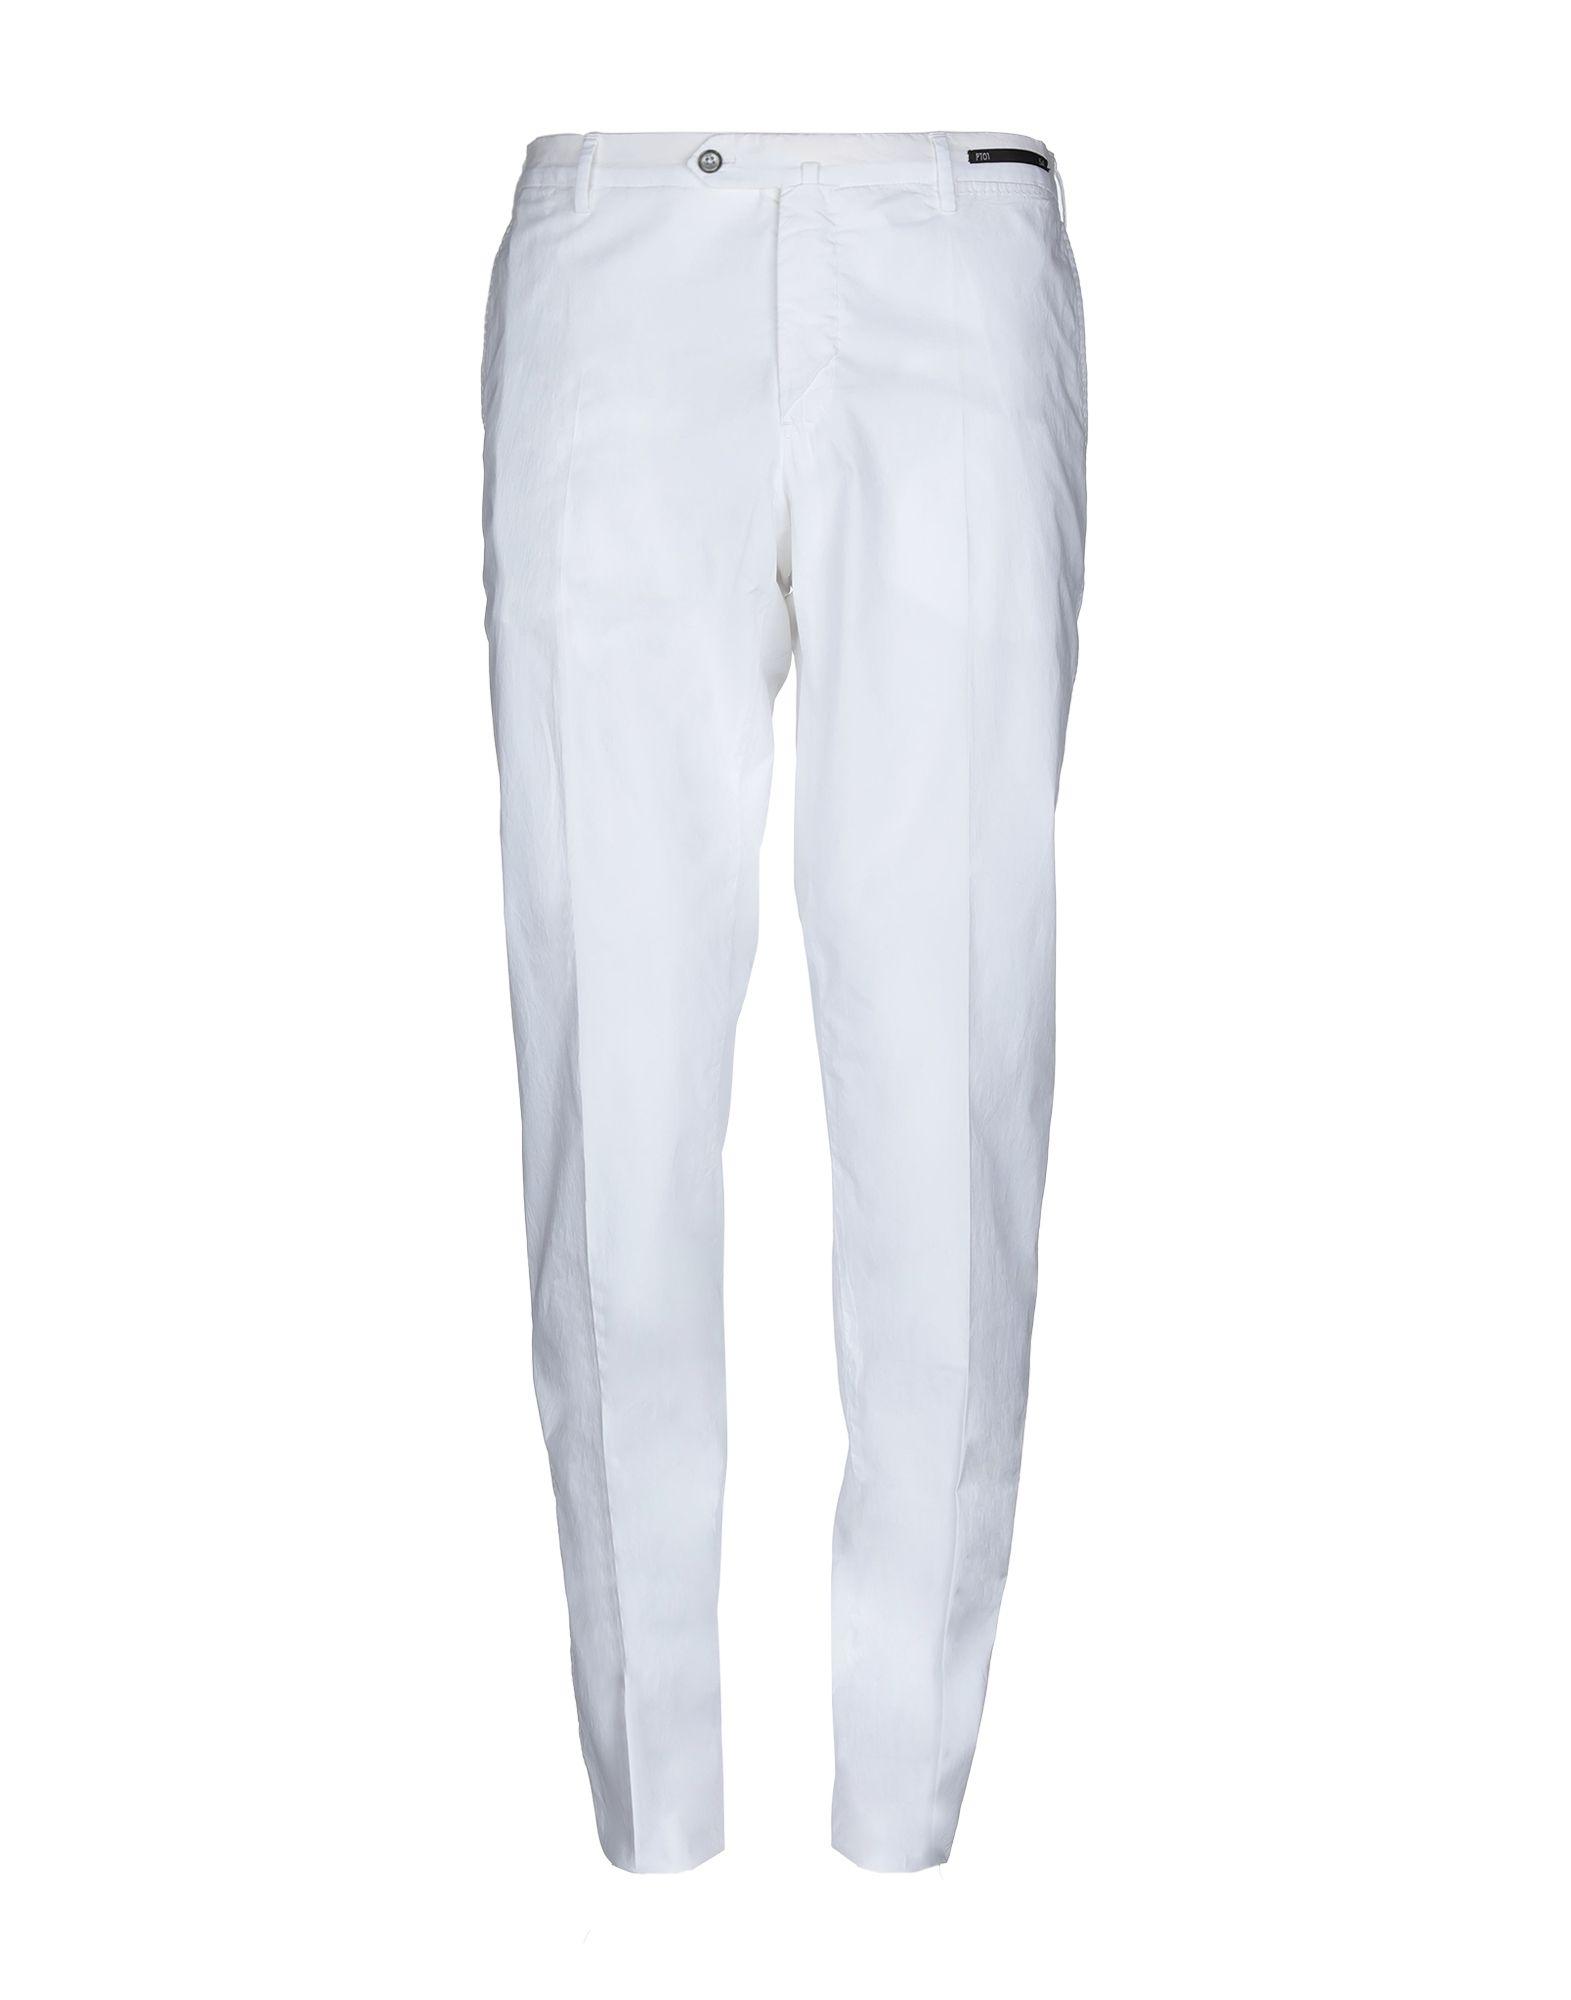 PT01 Cotton Casual Pants in Ivory (White) for Men - Save 23% - Lyst